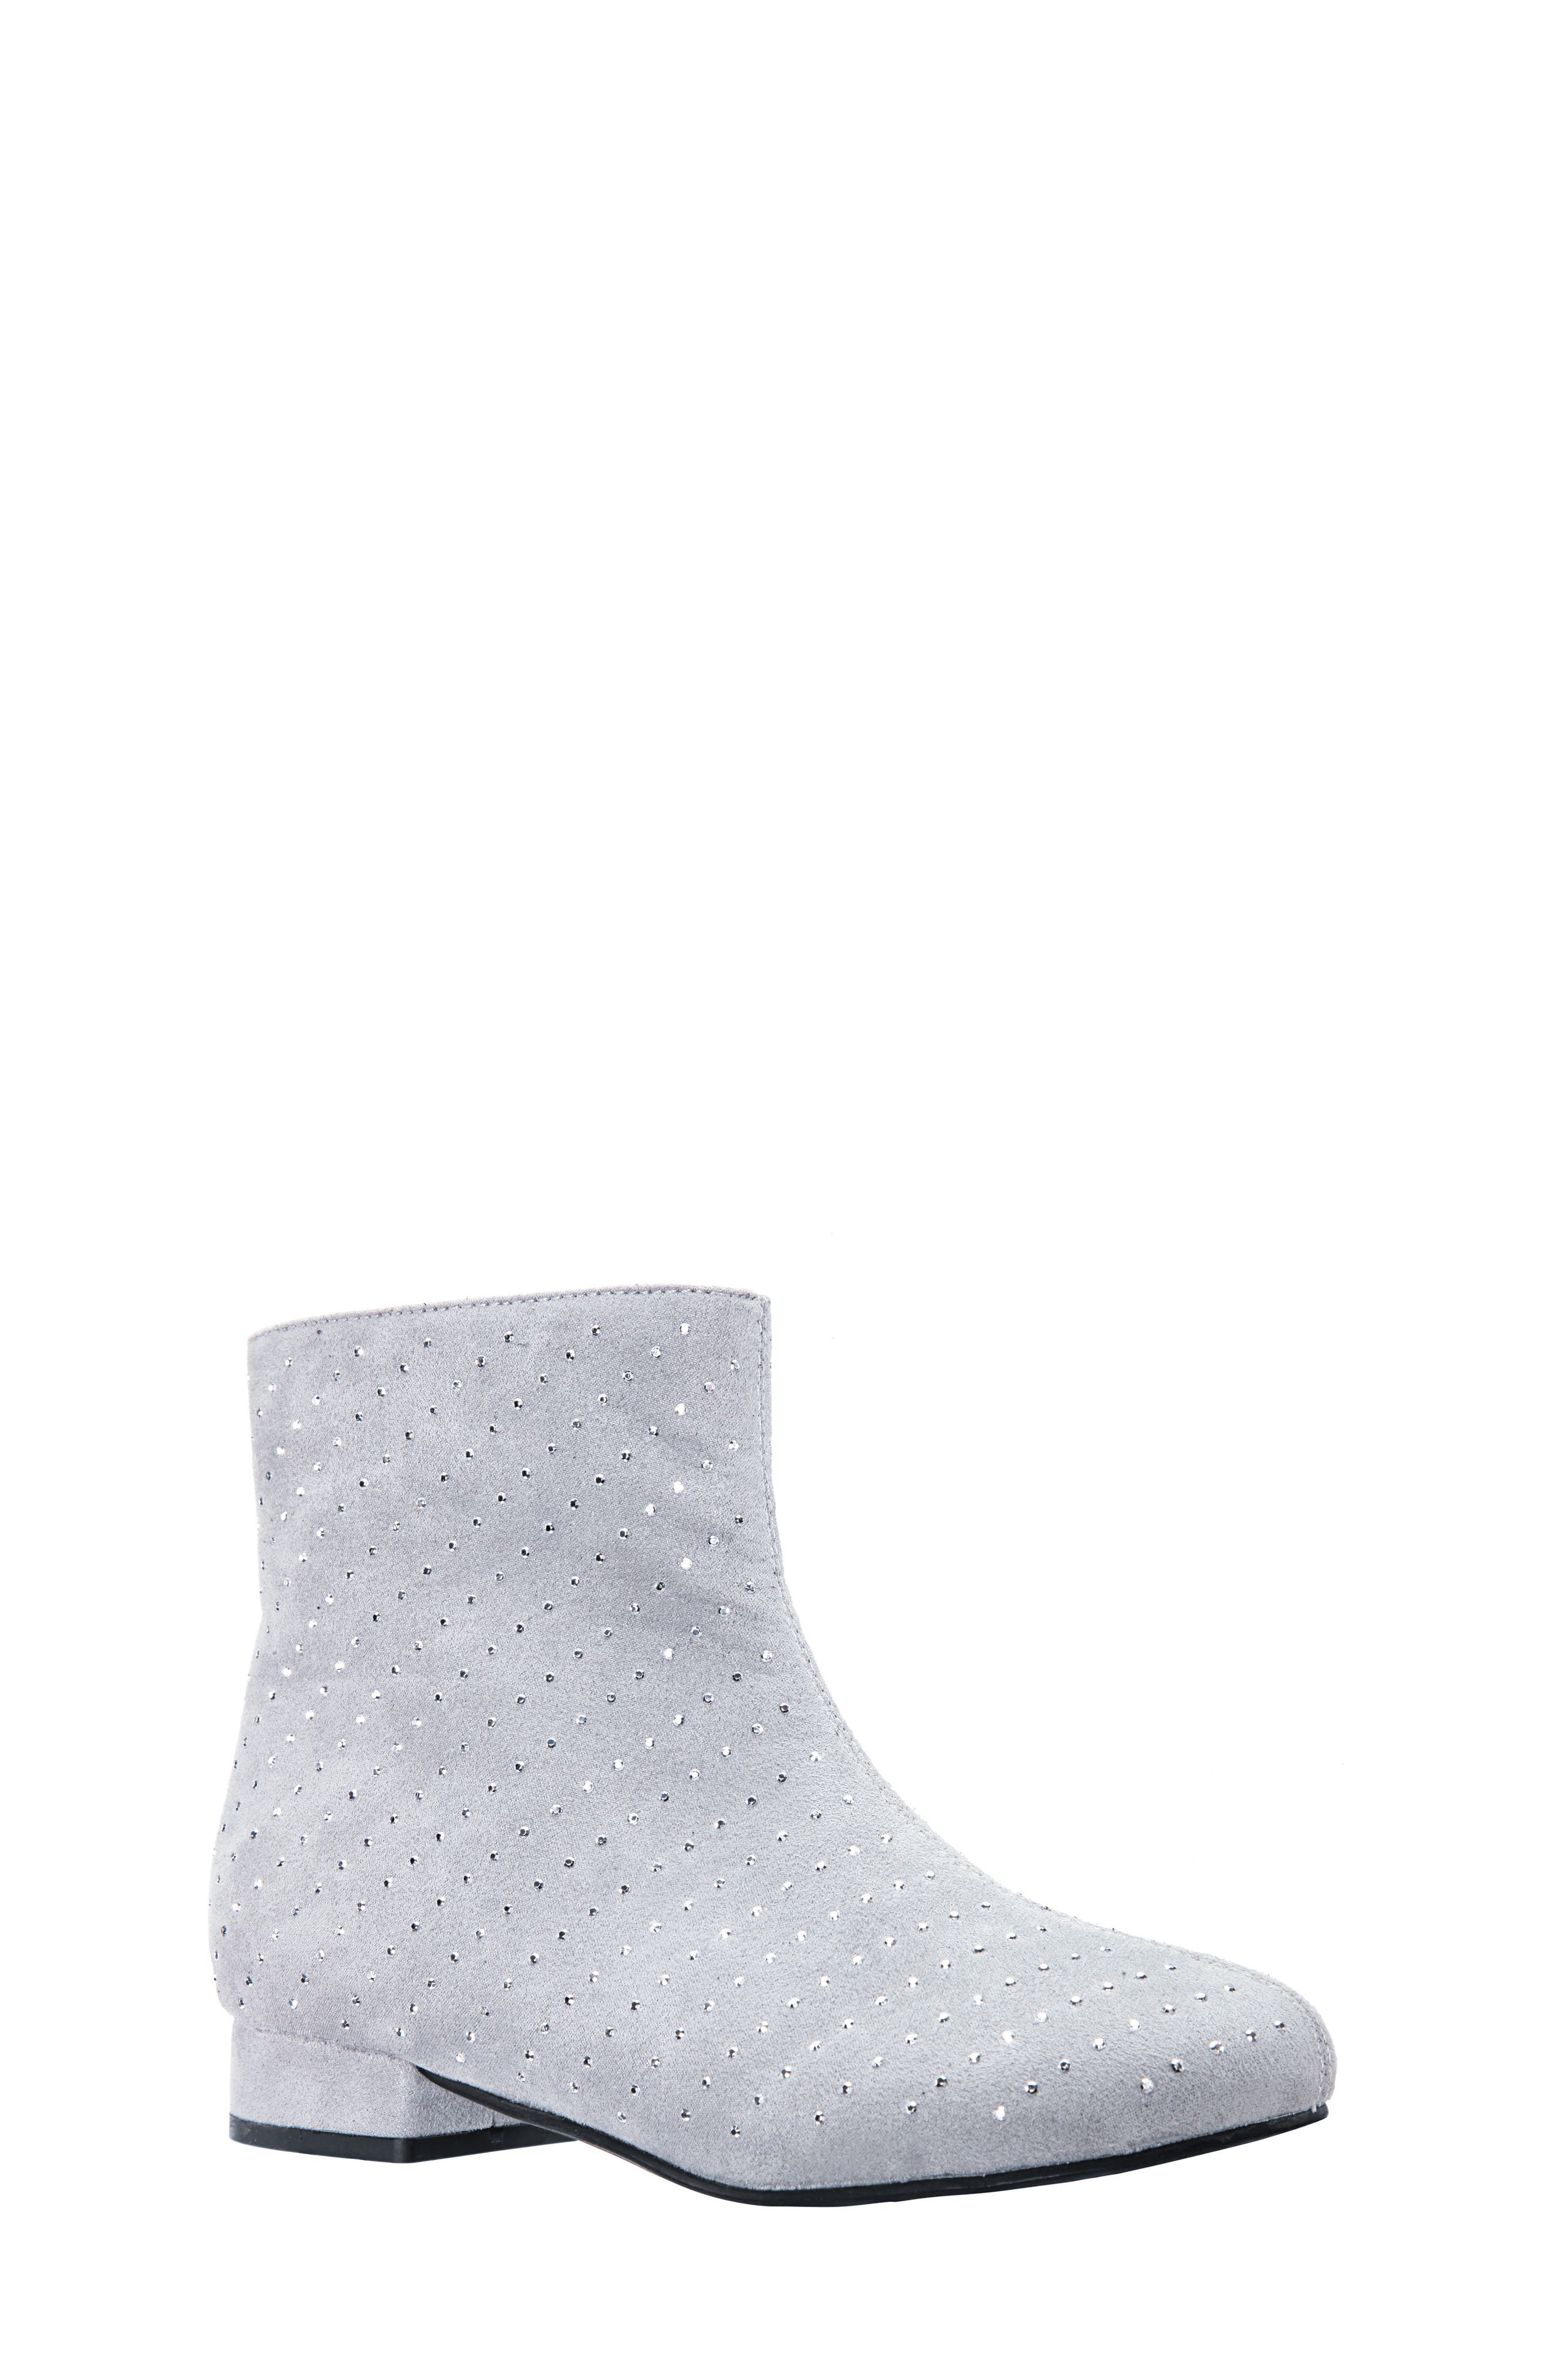 UPC 794378374787 product image for Toddler Girl's Nina Peaches Studded Bootie, Size 10 M - Grey | upcitemdb.com